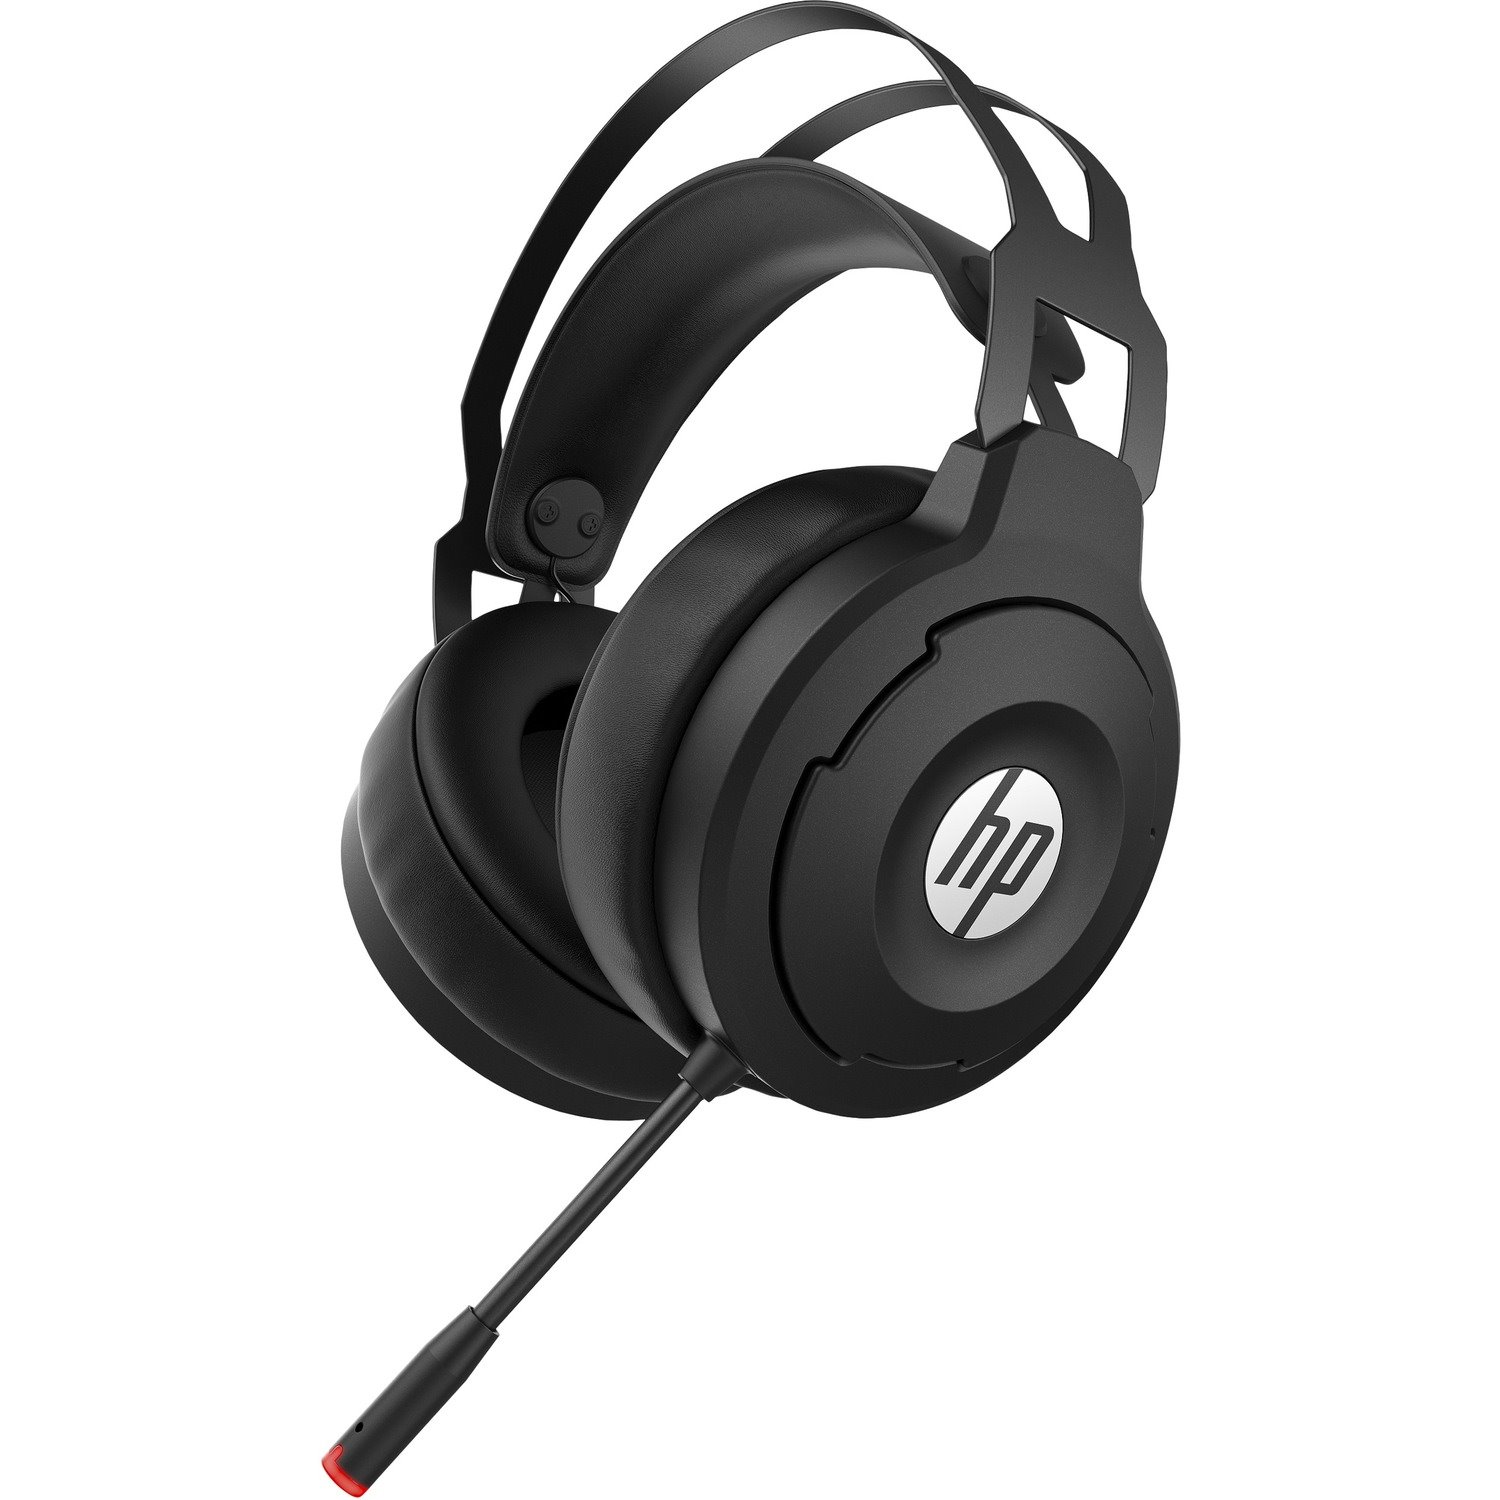 HP X1000 Wireless Over-the-head Stereo Gaming Headset - Black